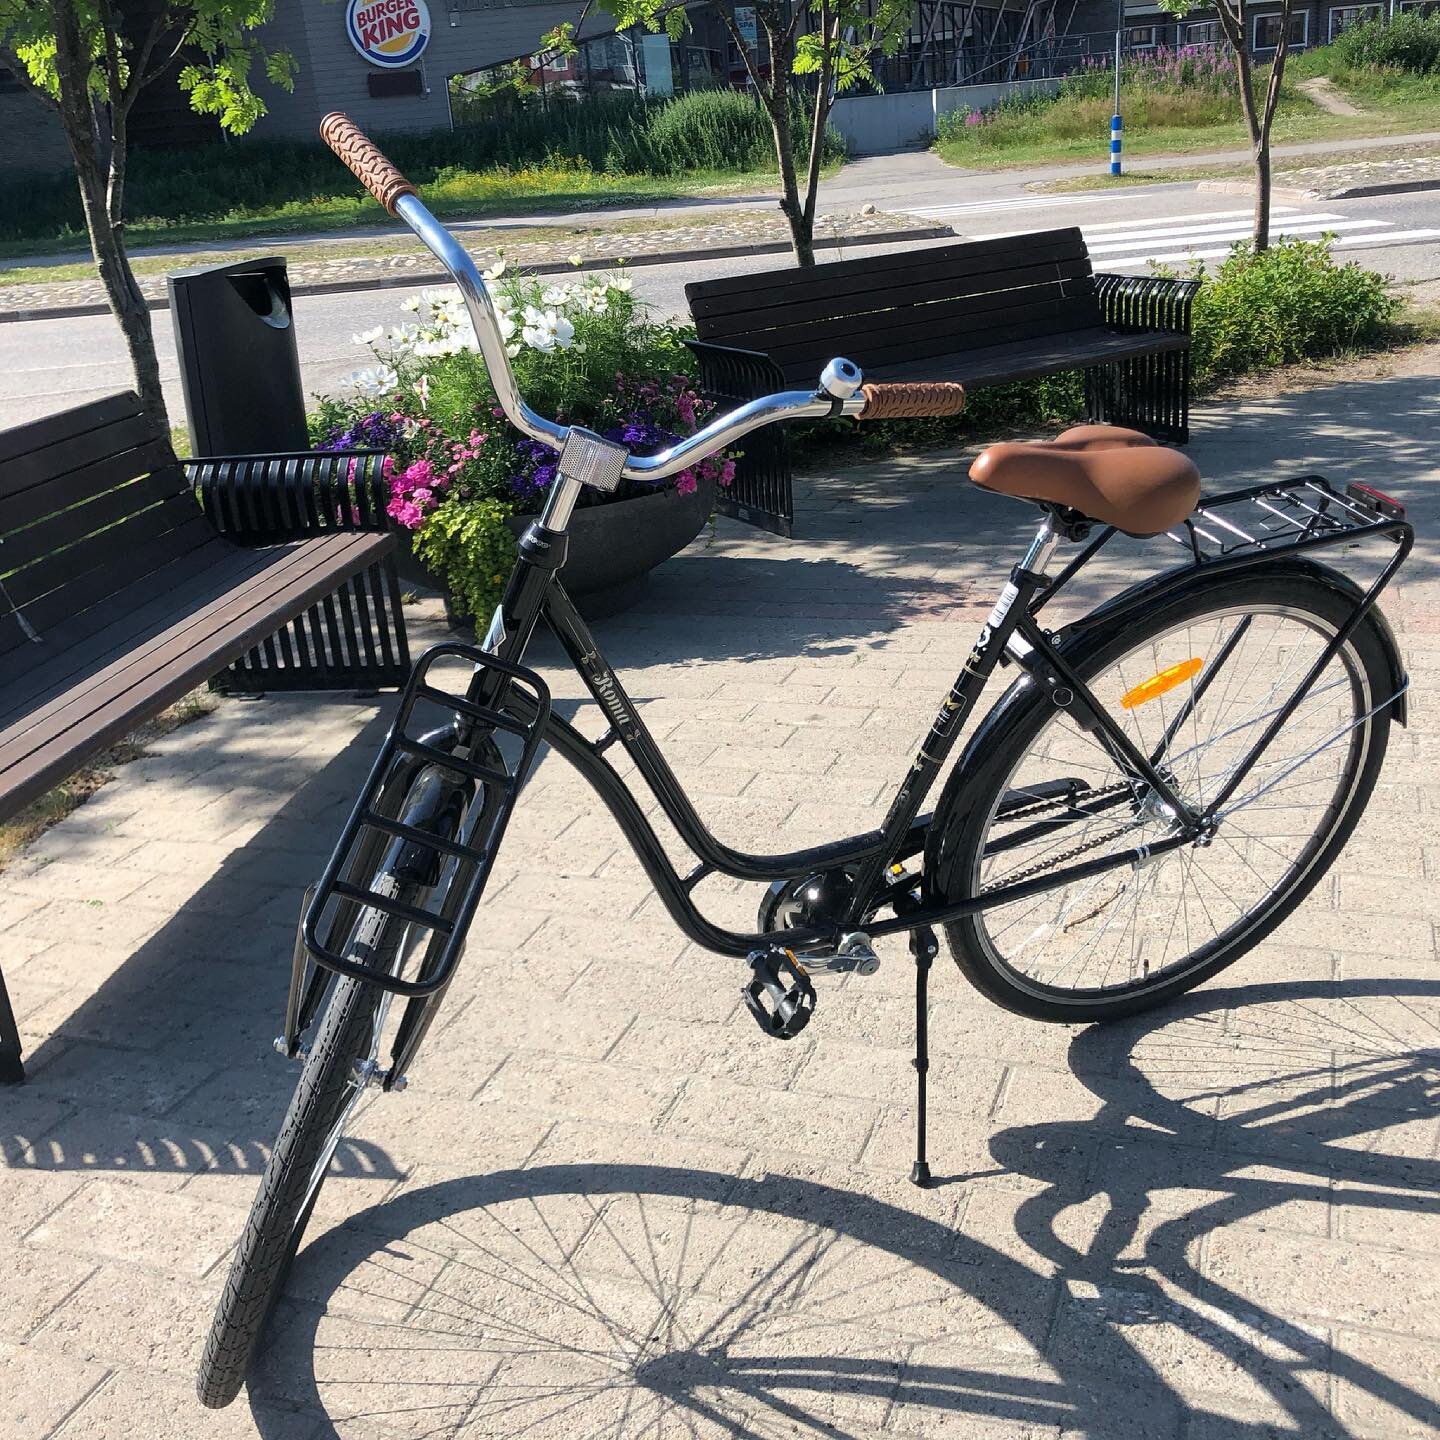 On these hot summer days, a good old fashioned traditional bike is a perfect way to cruise around the city center!
And the seats are extremely comfy for your butt too 😁
.
.
.
#levilapland 
#bikerental
#mummomankeli 
#elanskishoplevi 
#biking
#cruisi